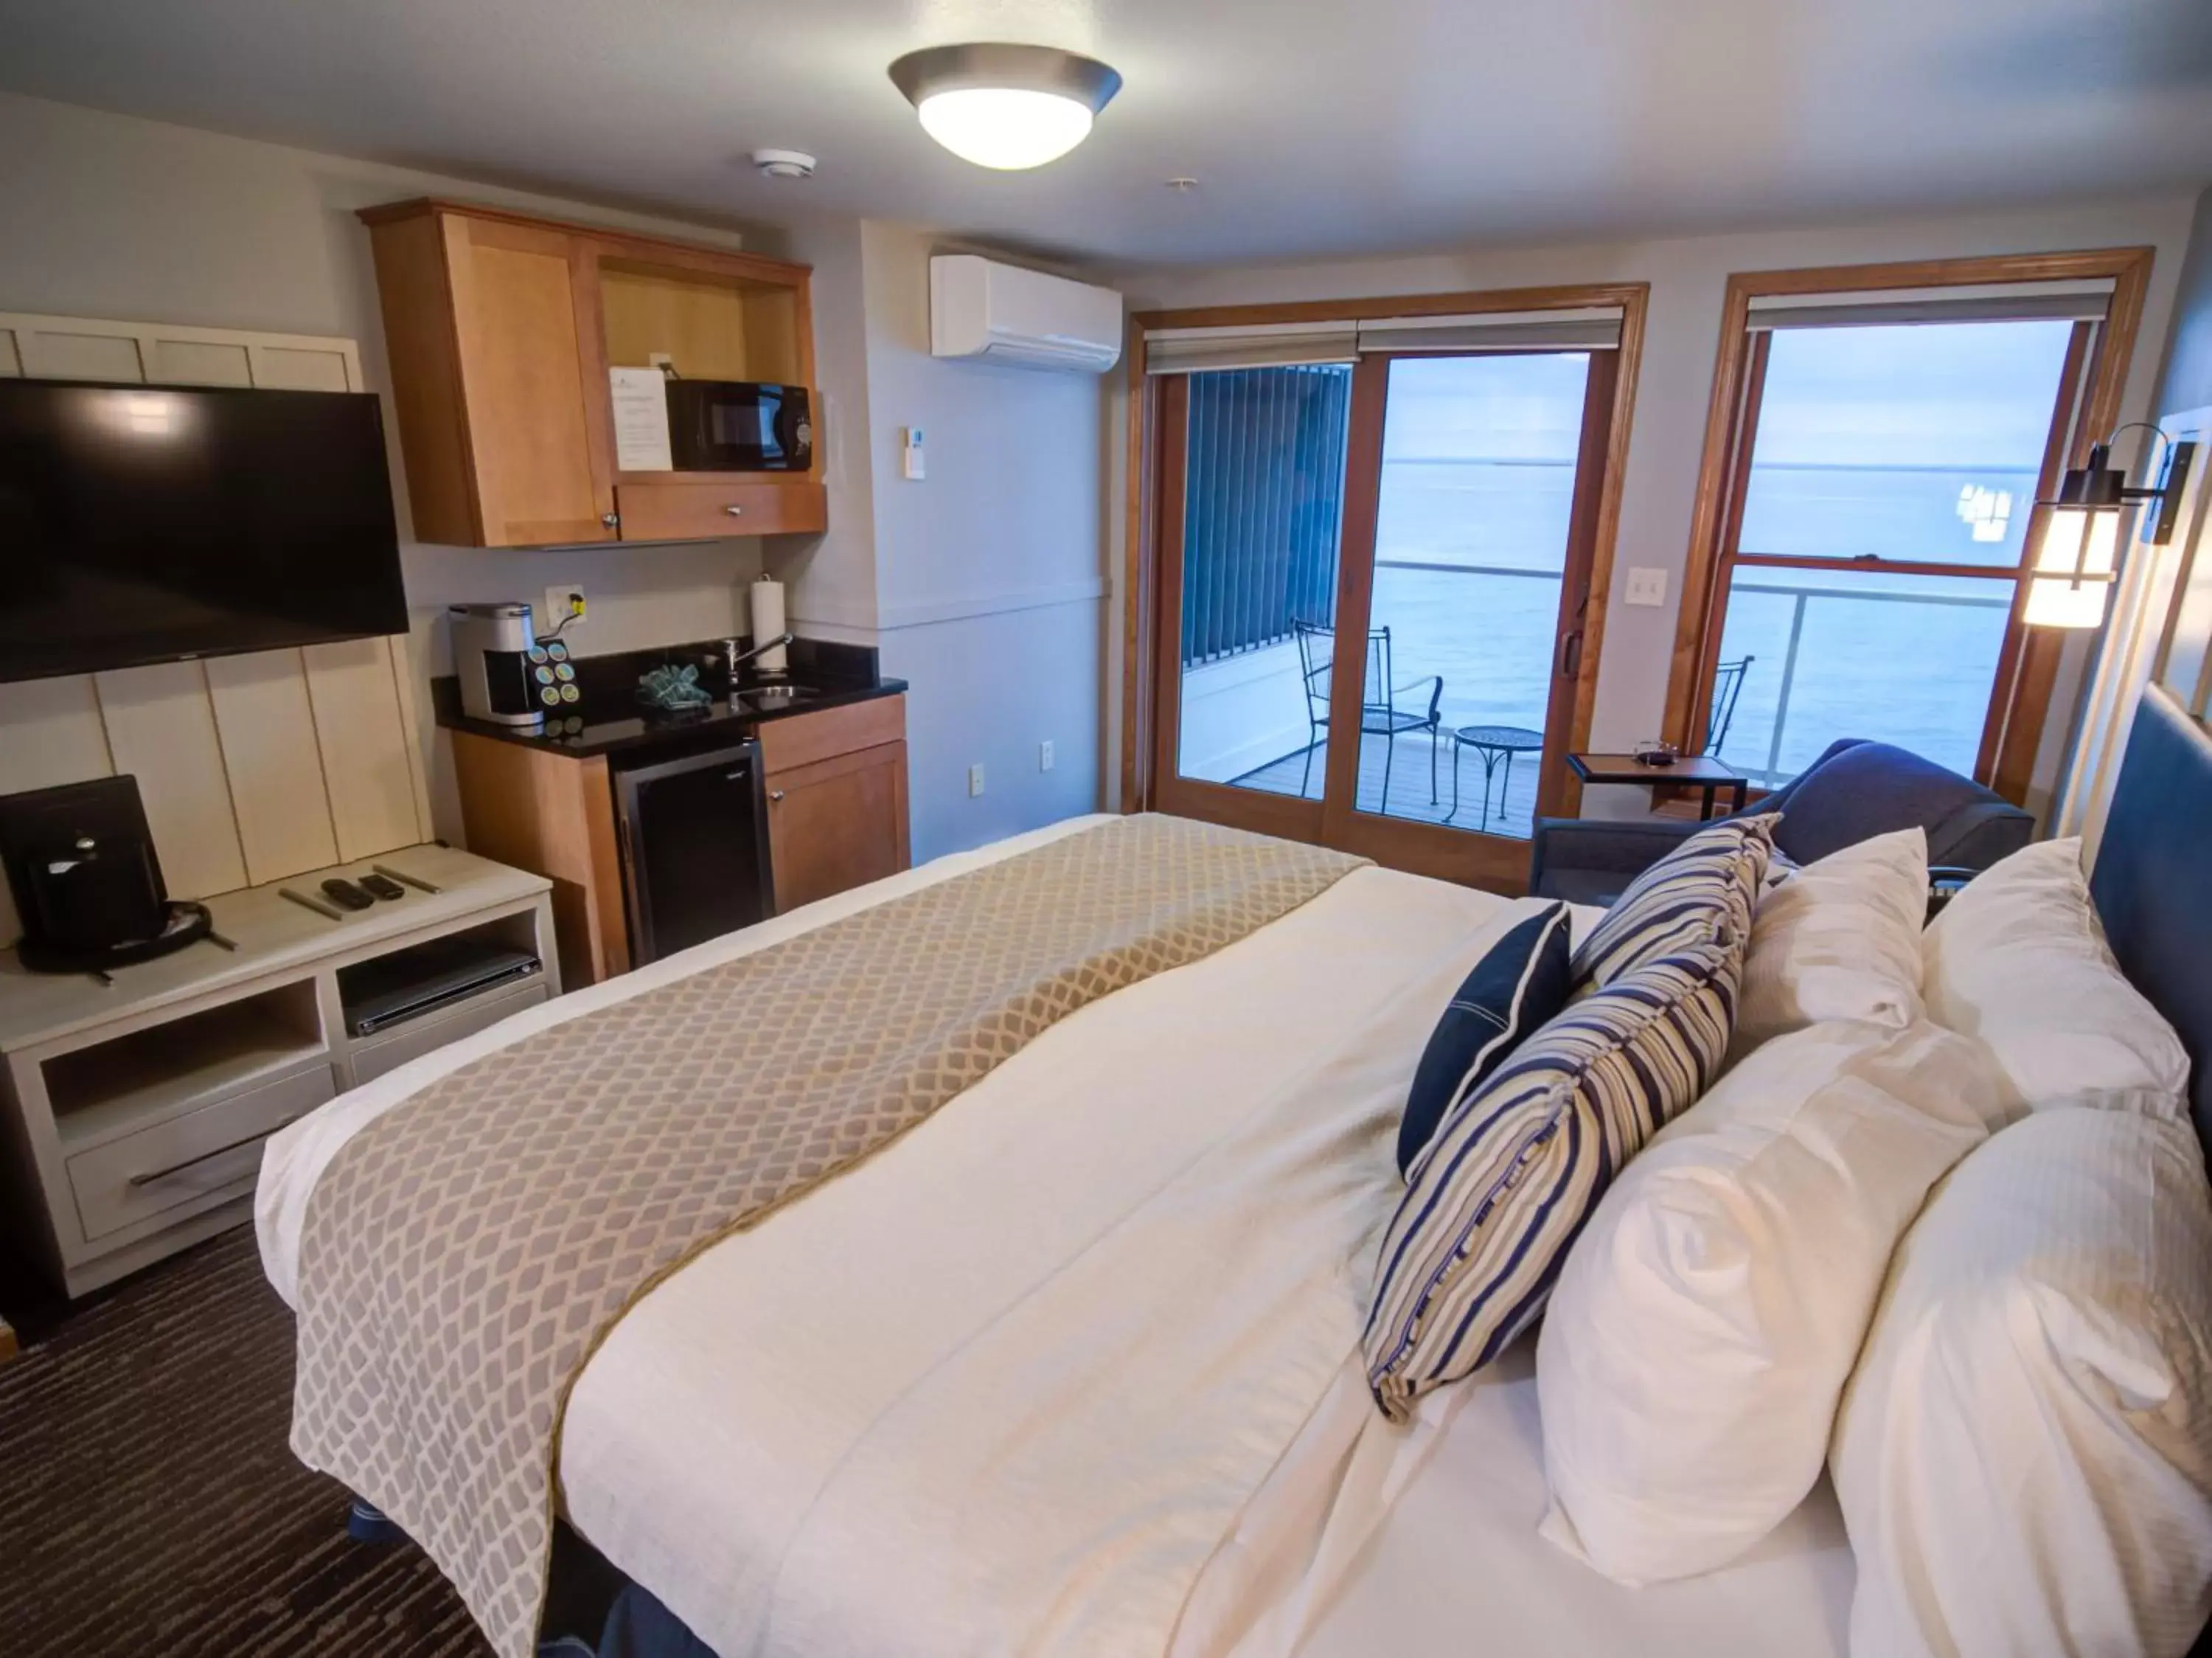 One-Bedroom Suite in Beacon Pointe on Lake Superior